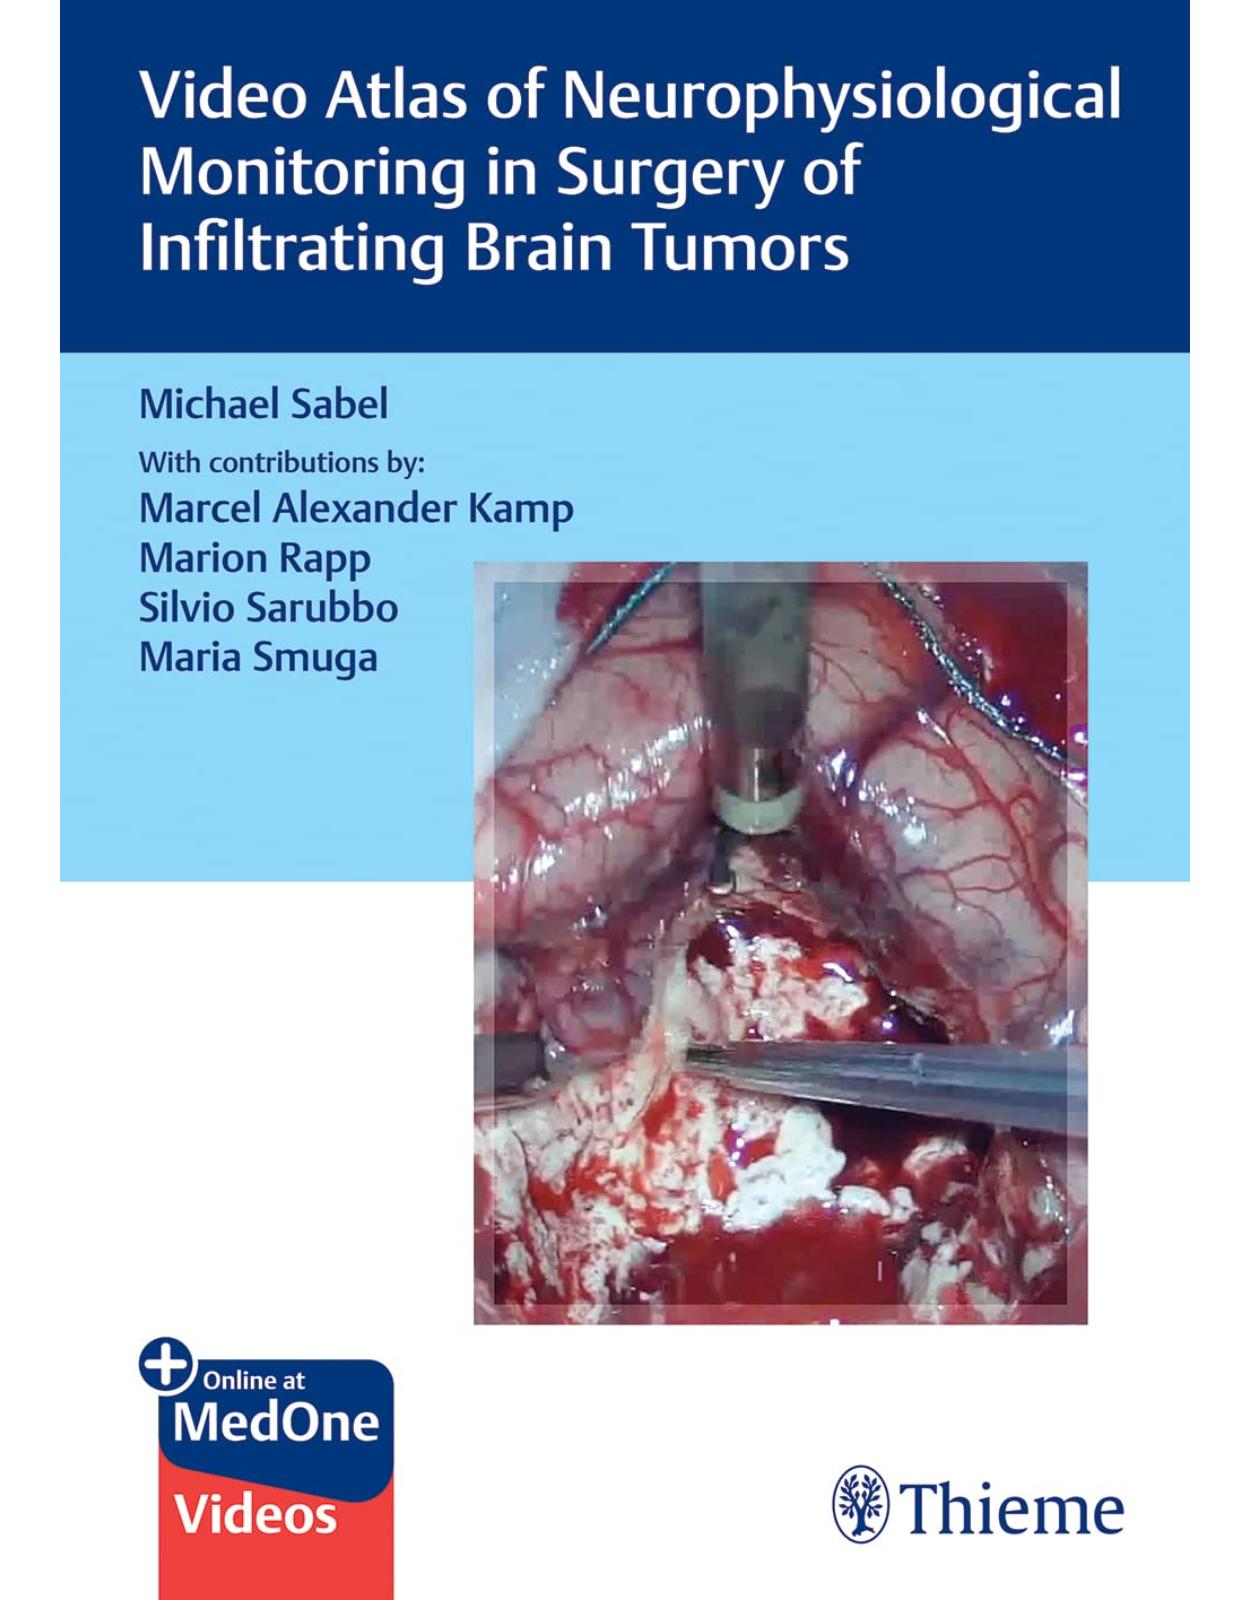 Video Atlas of Neurophysiological Monitoring in Surgery of Infiltrating Brain Tumors